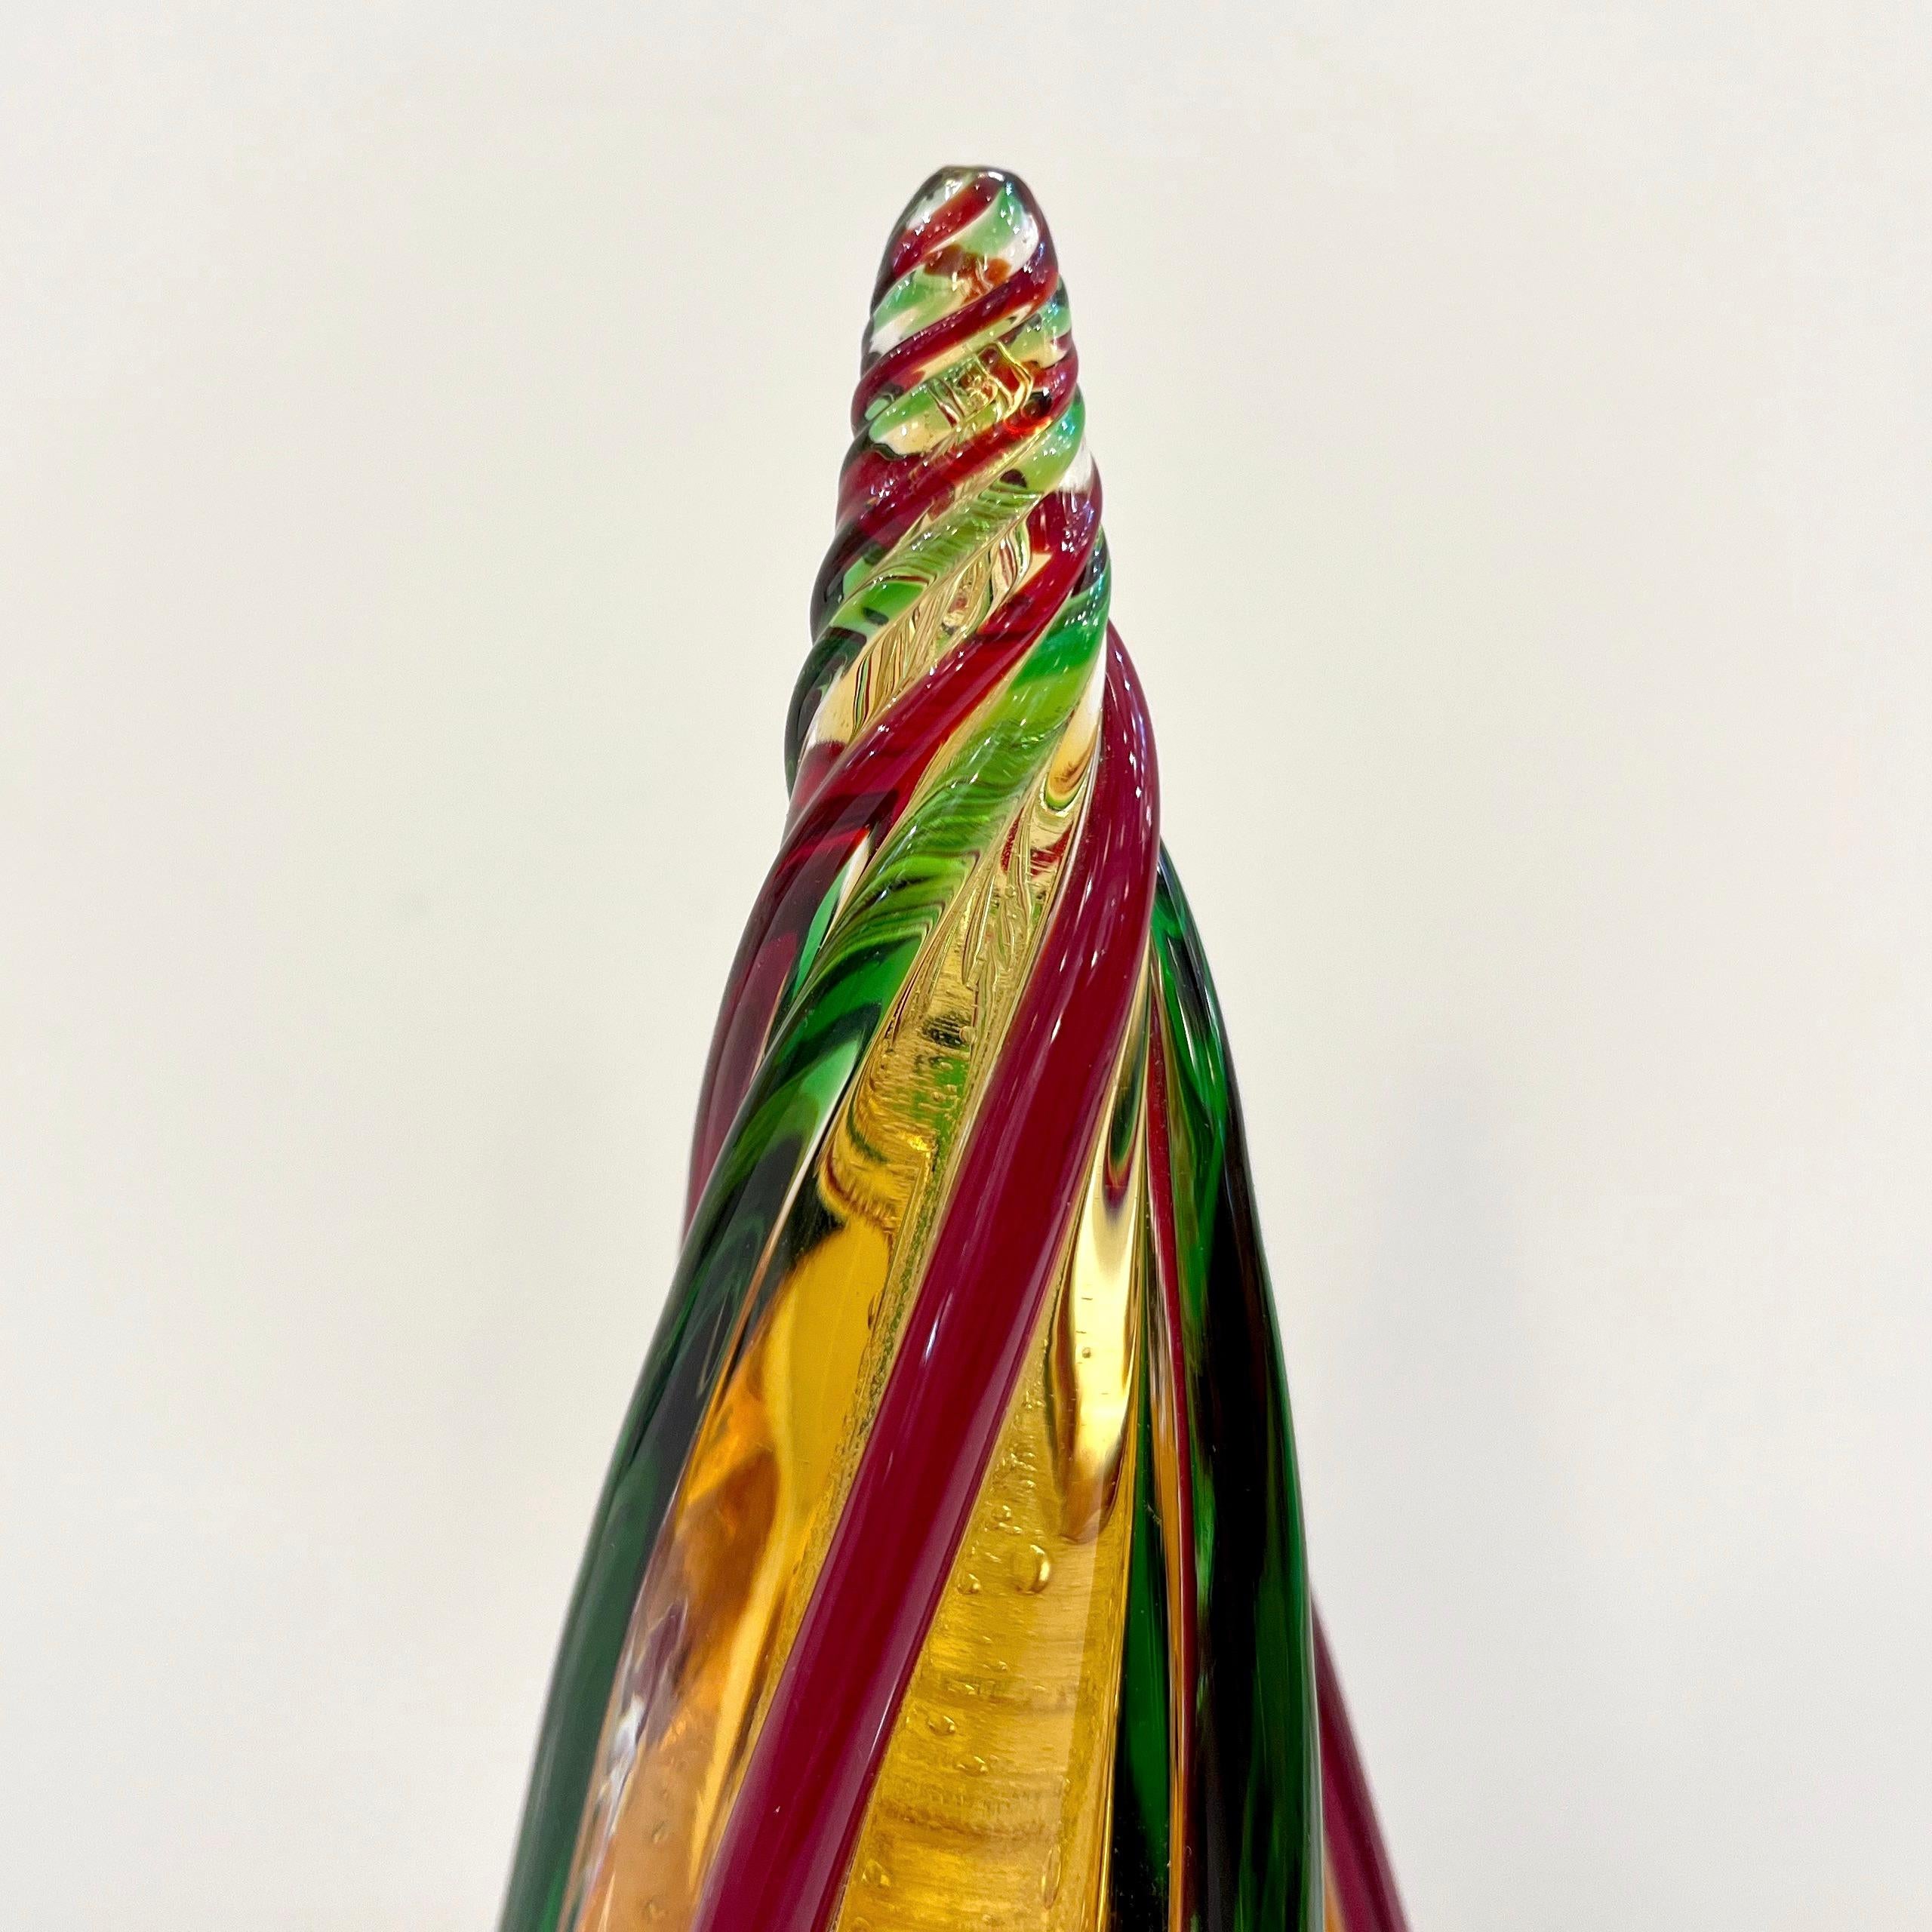 Organic Modern Formia Italian Vintage Red Green Amber Murano Glass Christmas Tree Sculpture For Sale